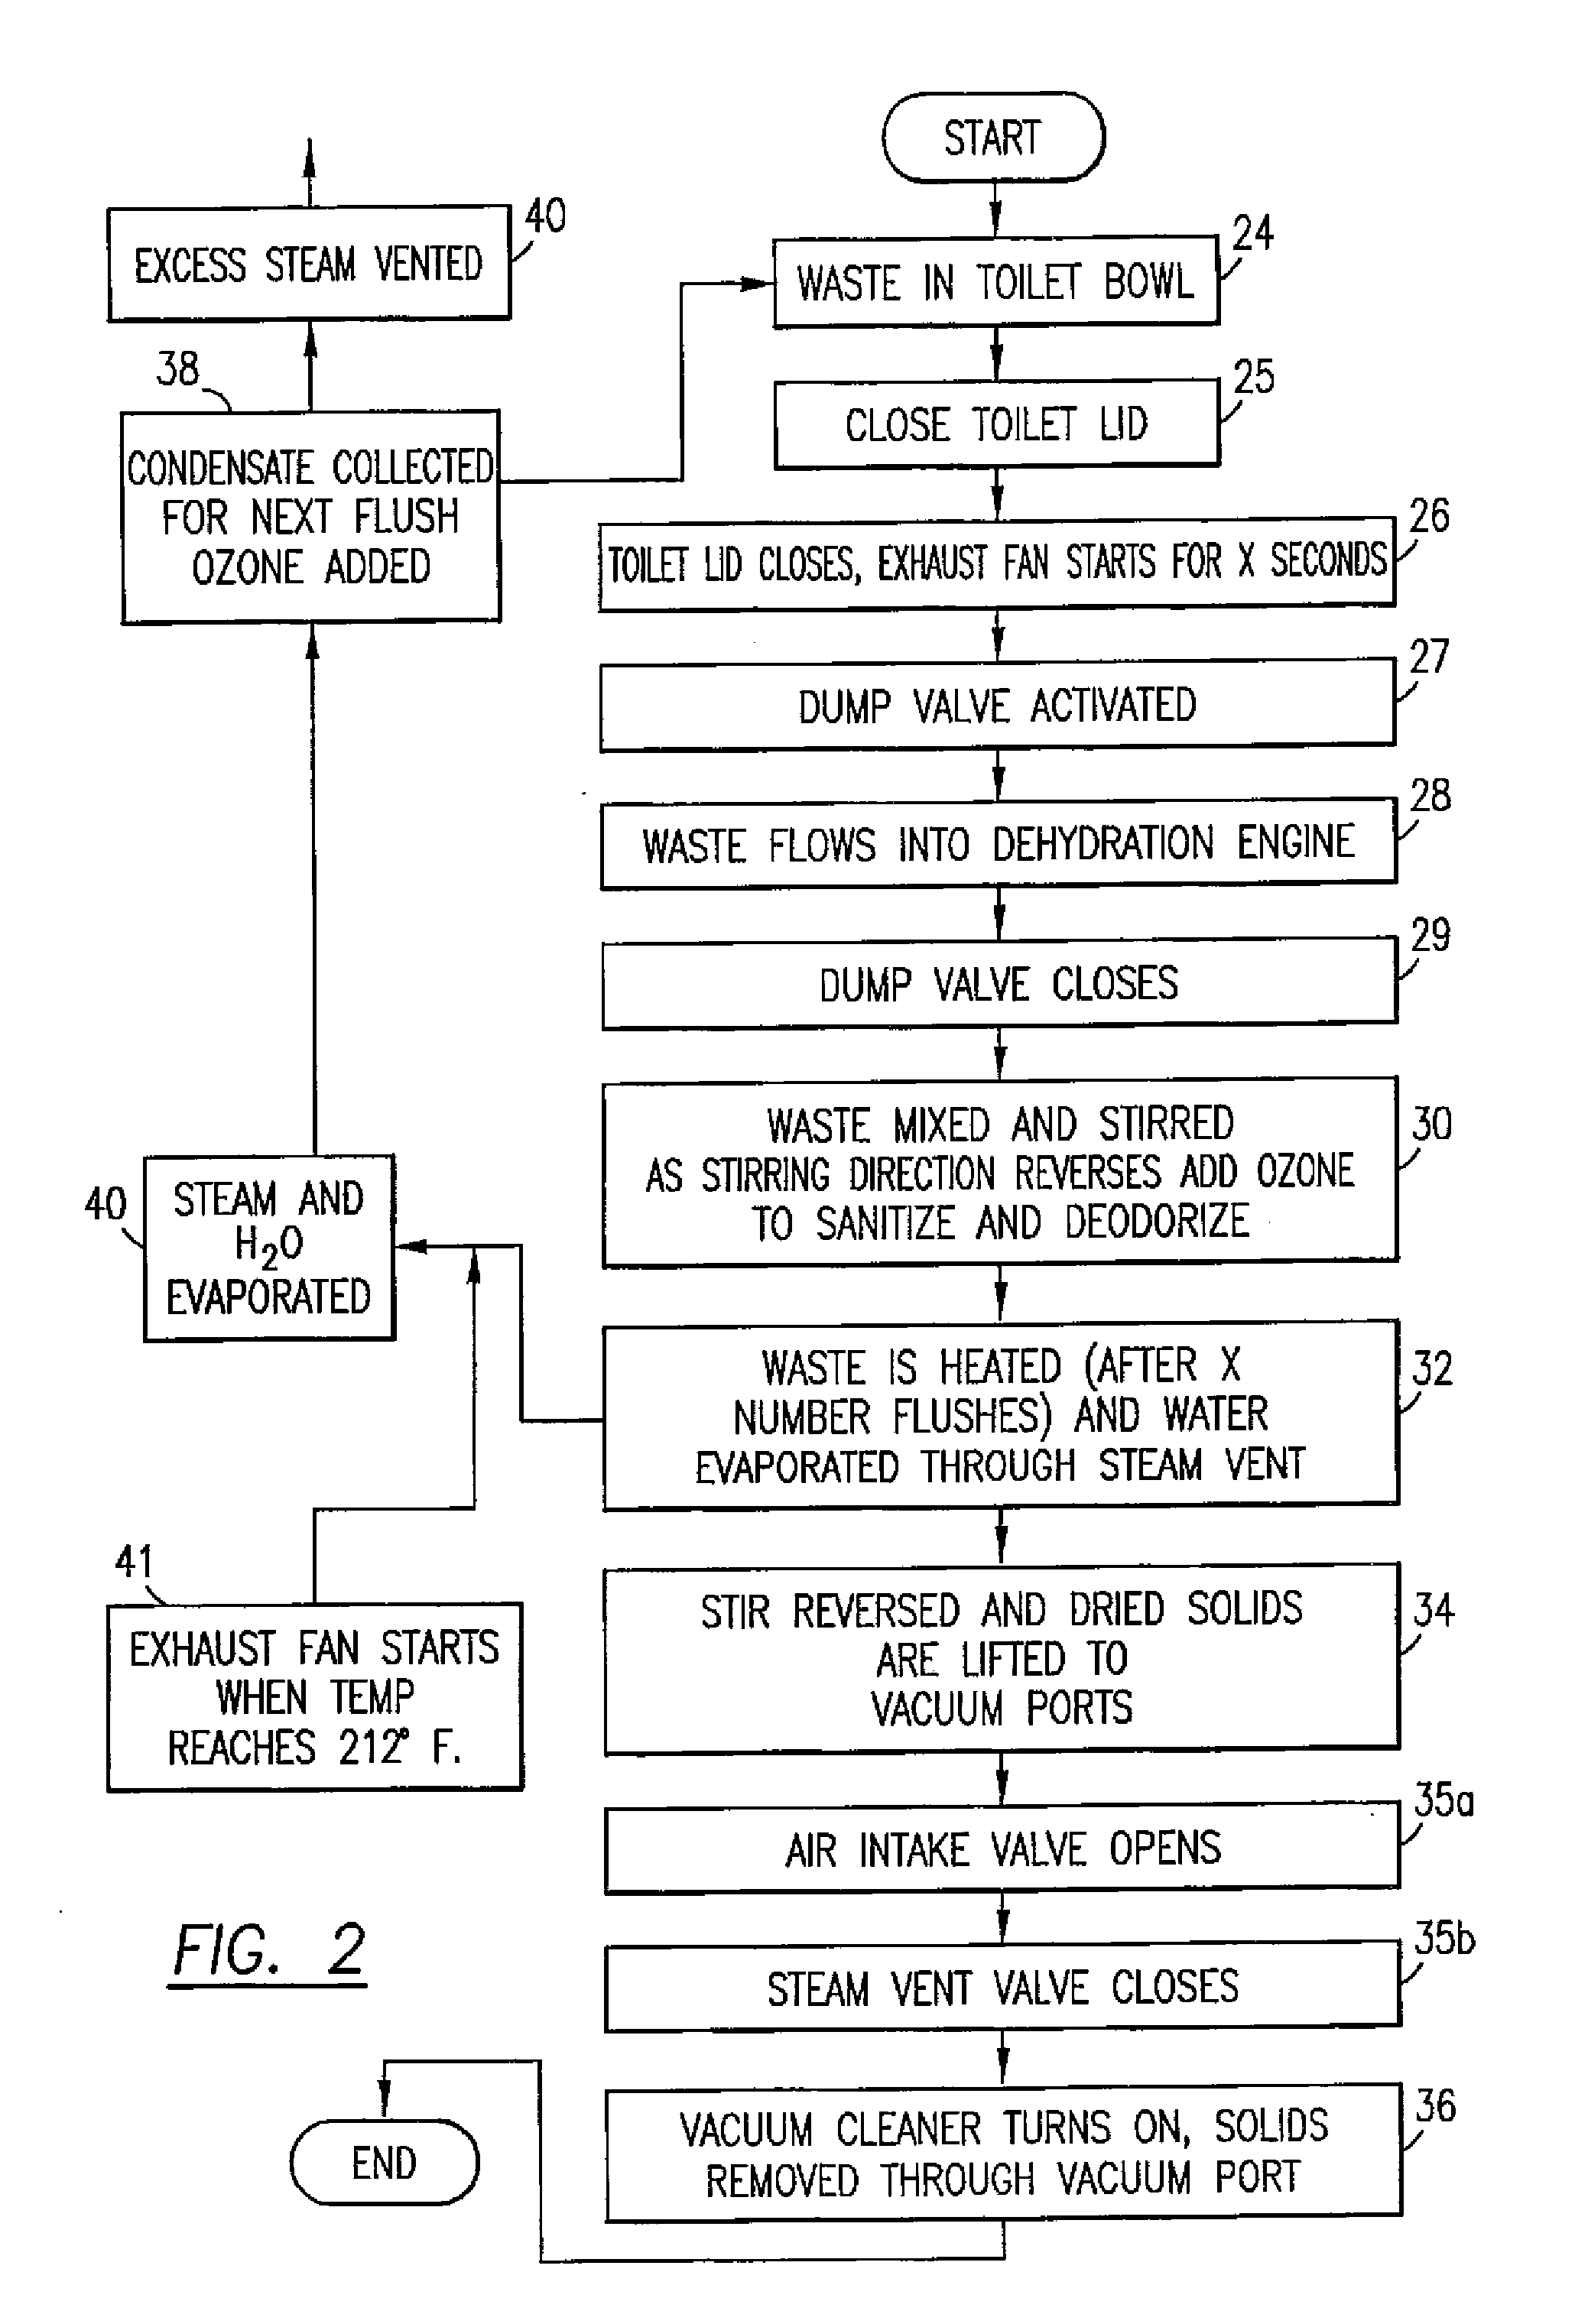 Mobile or stationary modular self-contained dehydration toilet, dehydration engine, and gray water recovery system